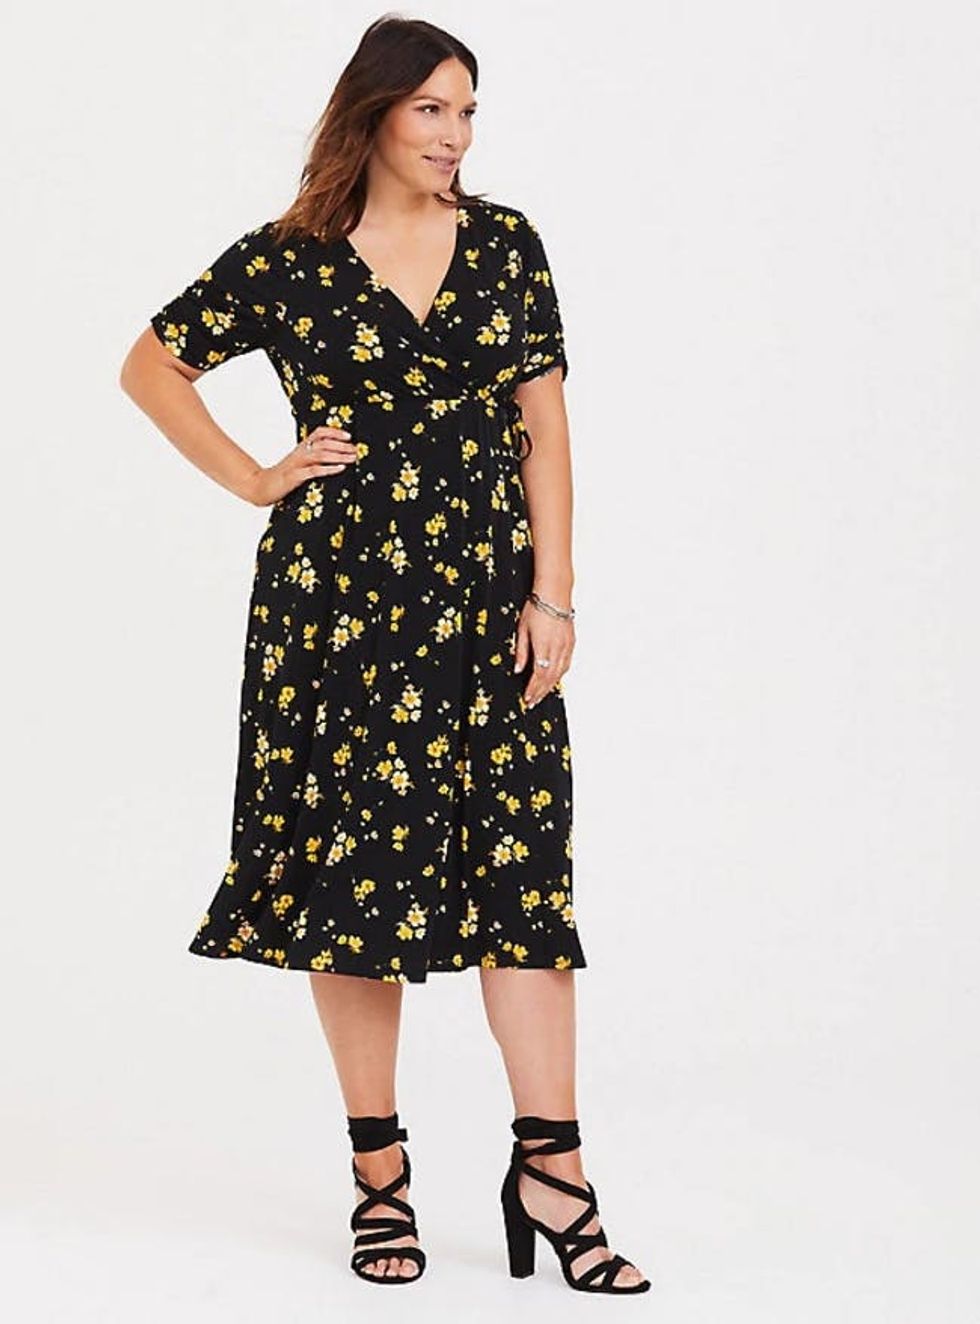 15 Trendy Date Night Dresses for Under $100 - Brit + Co